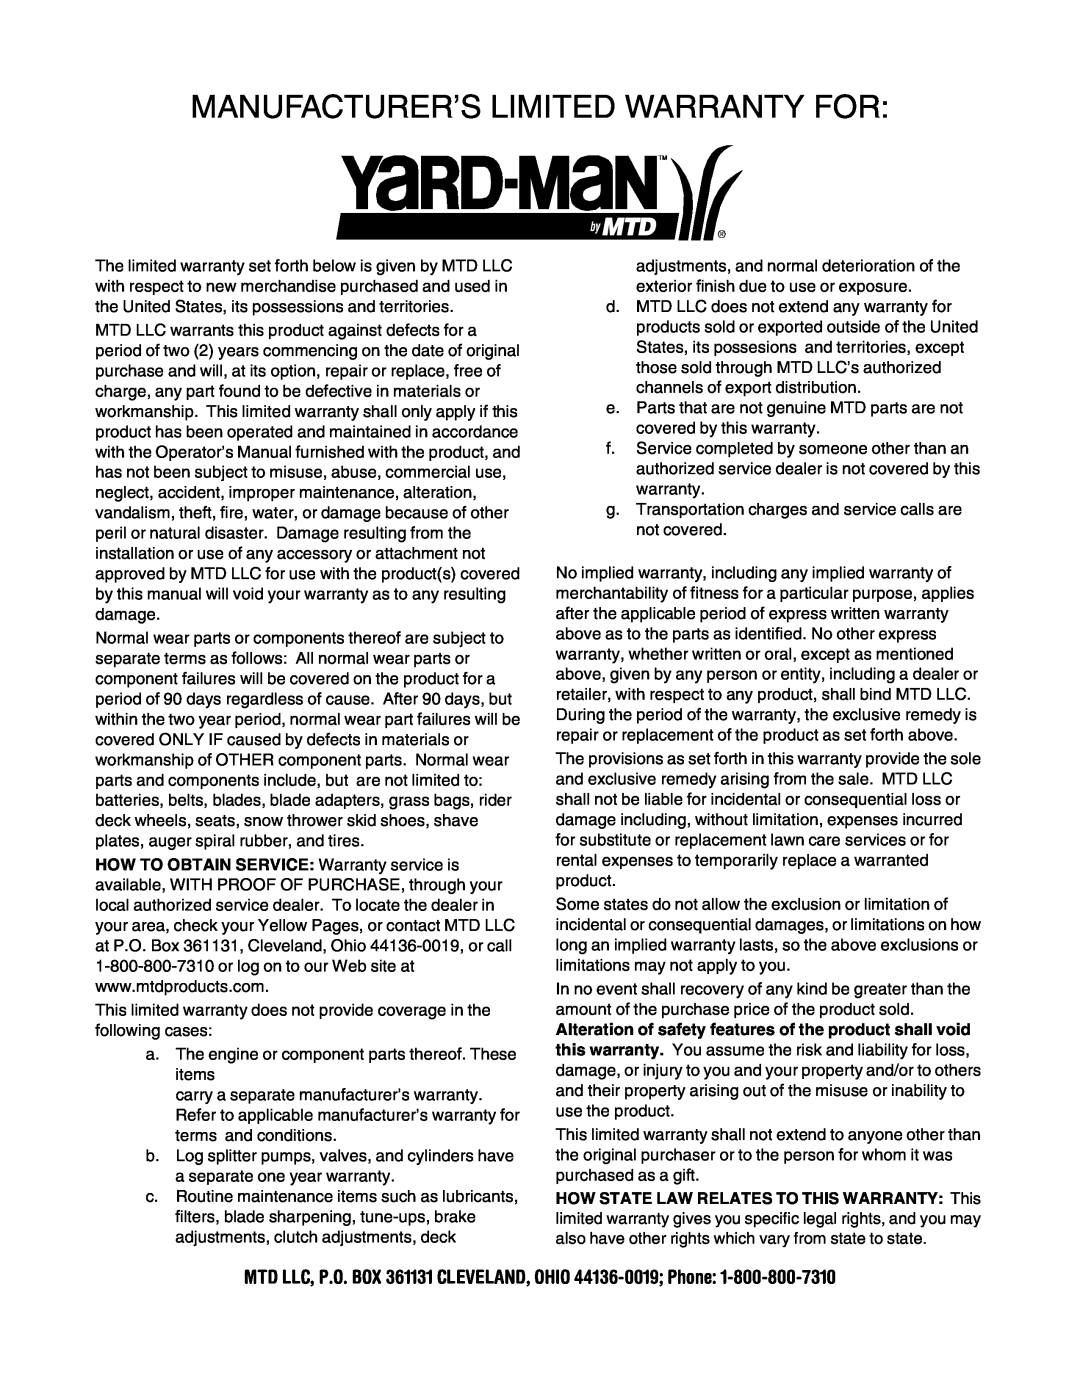 Yard-Man 573 manual Manufacturer’S Limited Warranty For, HOW STATE LAW RELATES TO THIS WARRANTY This 